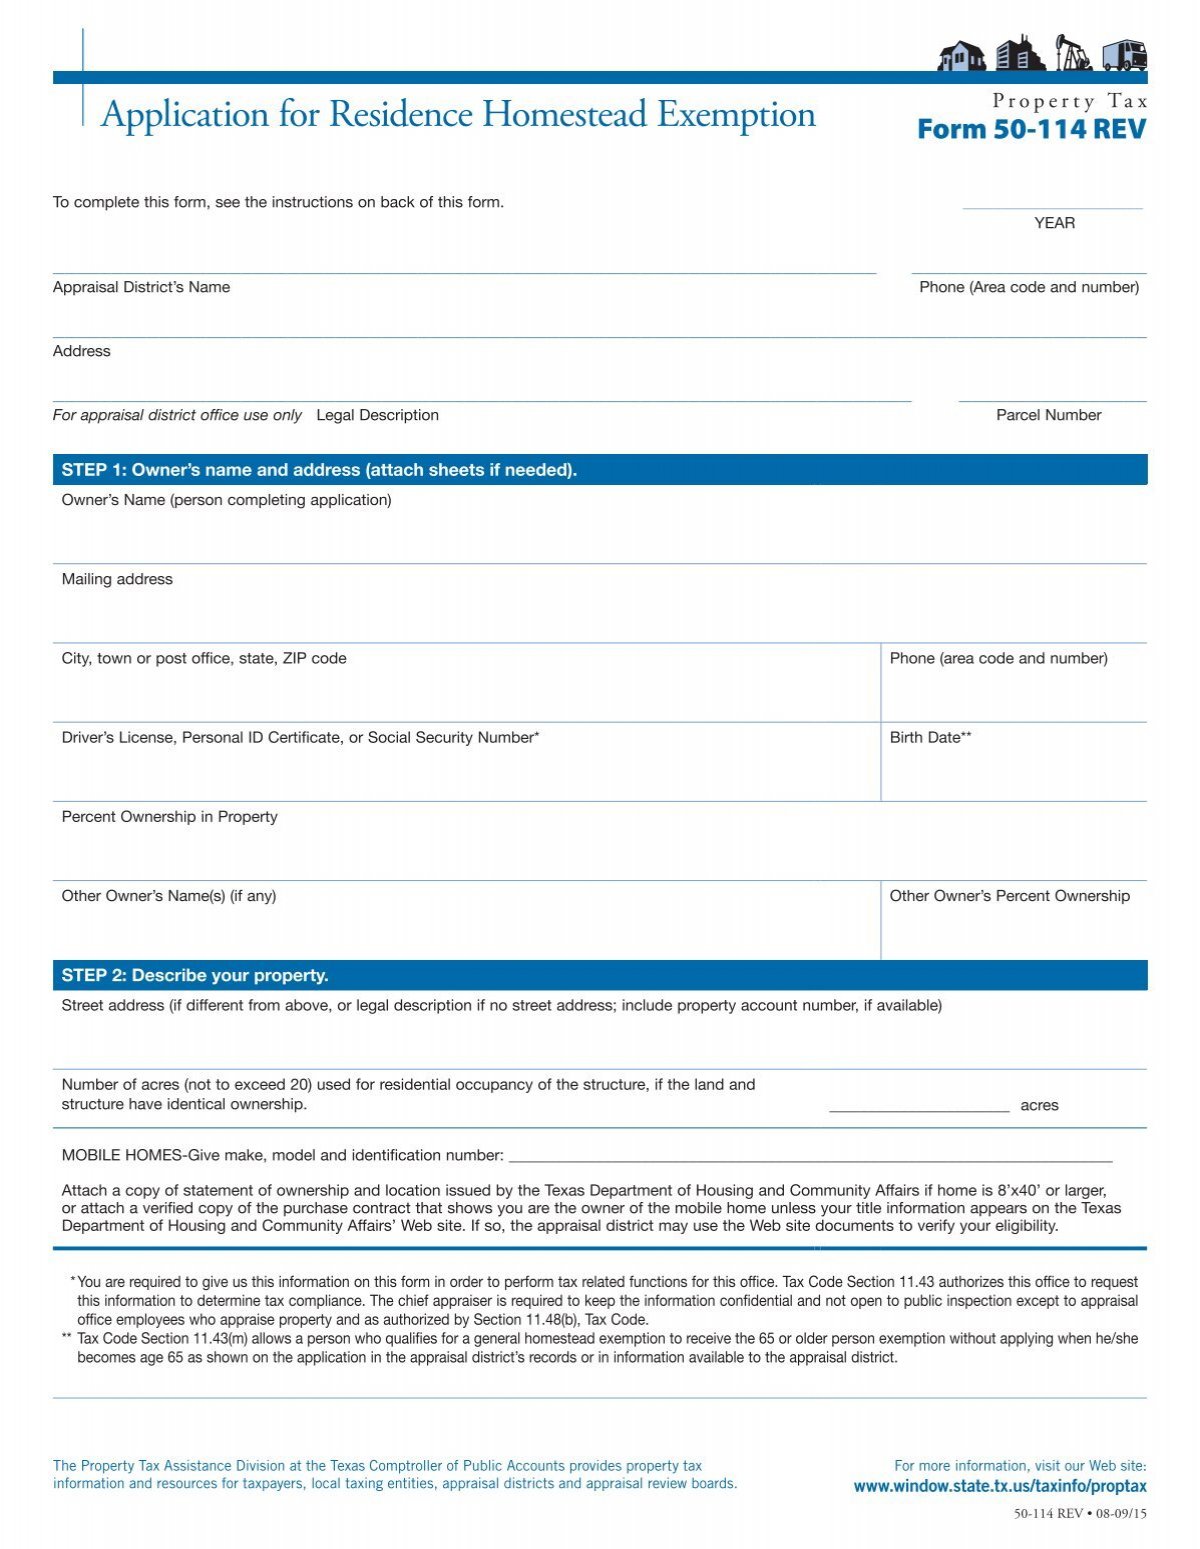 application-for-residence-homestead-exemption